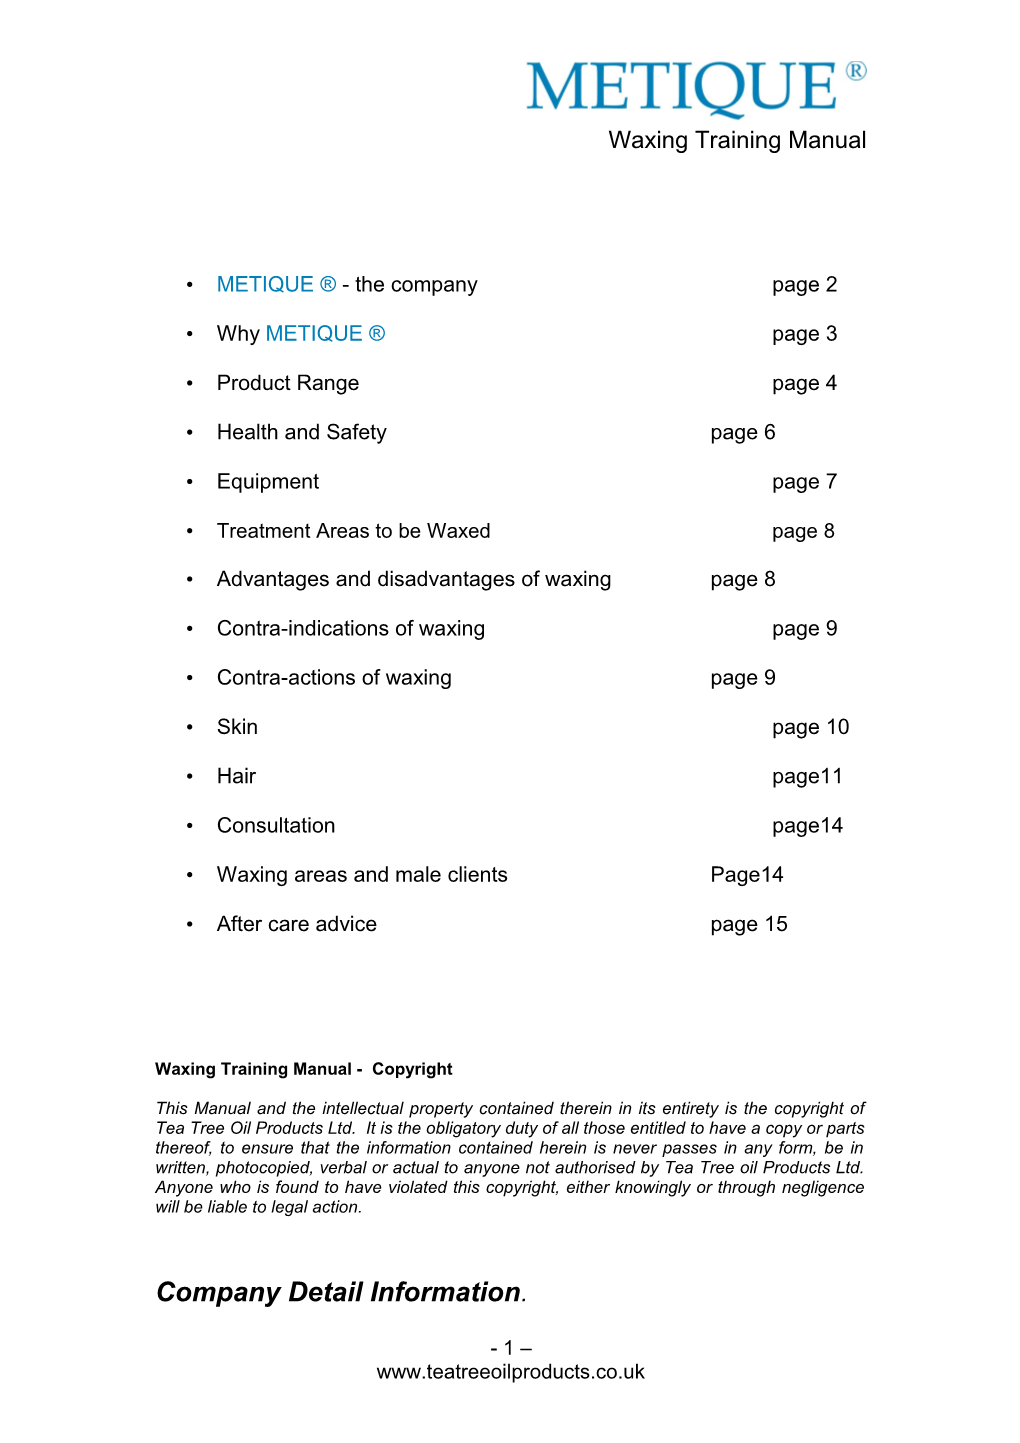 METIQUE - the Company Page 2